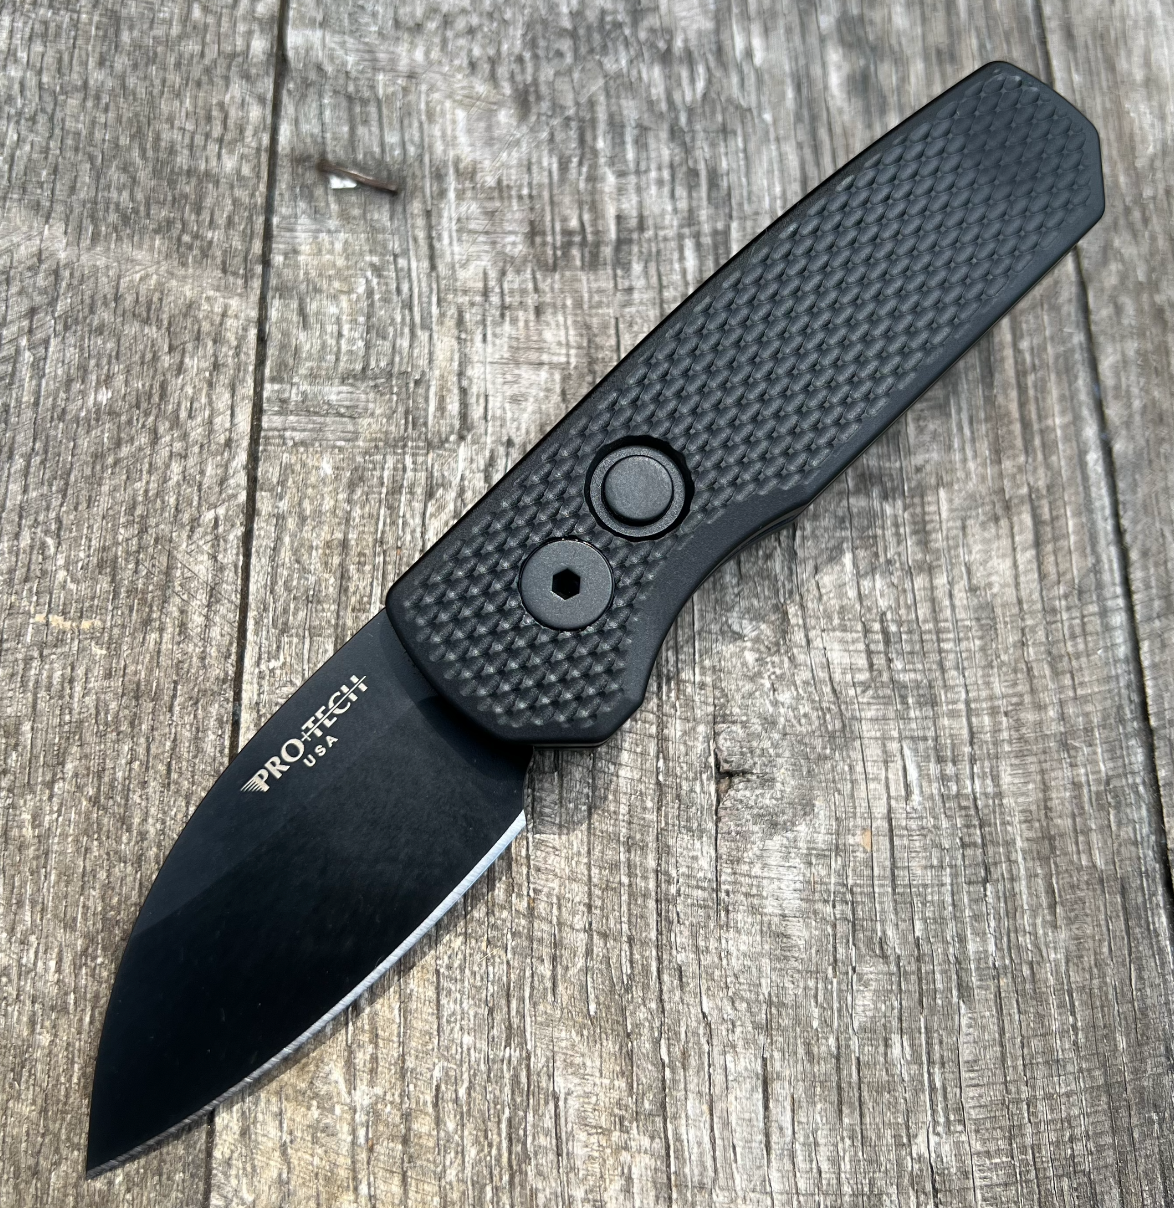 Protech Runt 5 R5106 Wharncliffe Blade Textured Black Handle